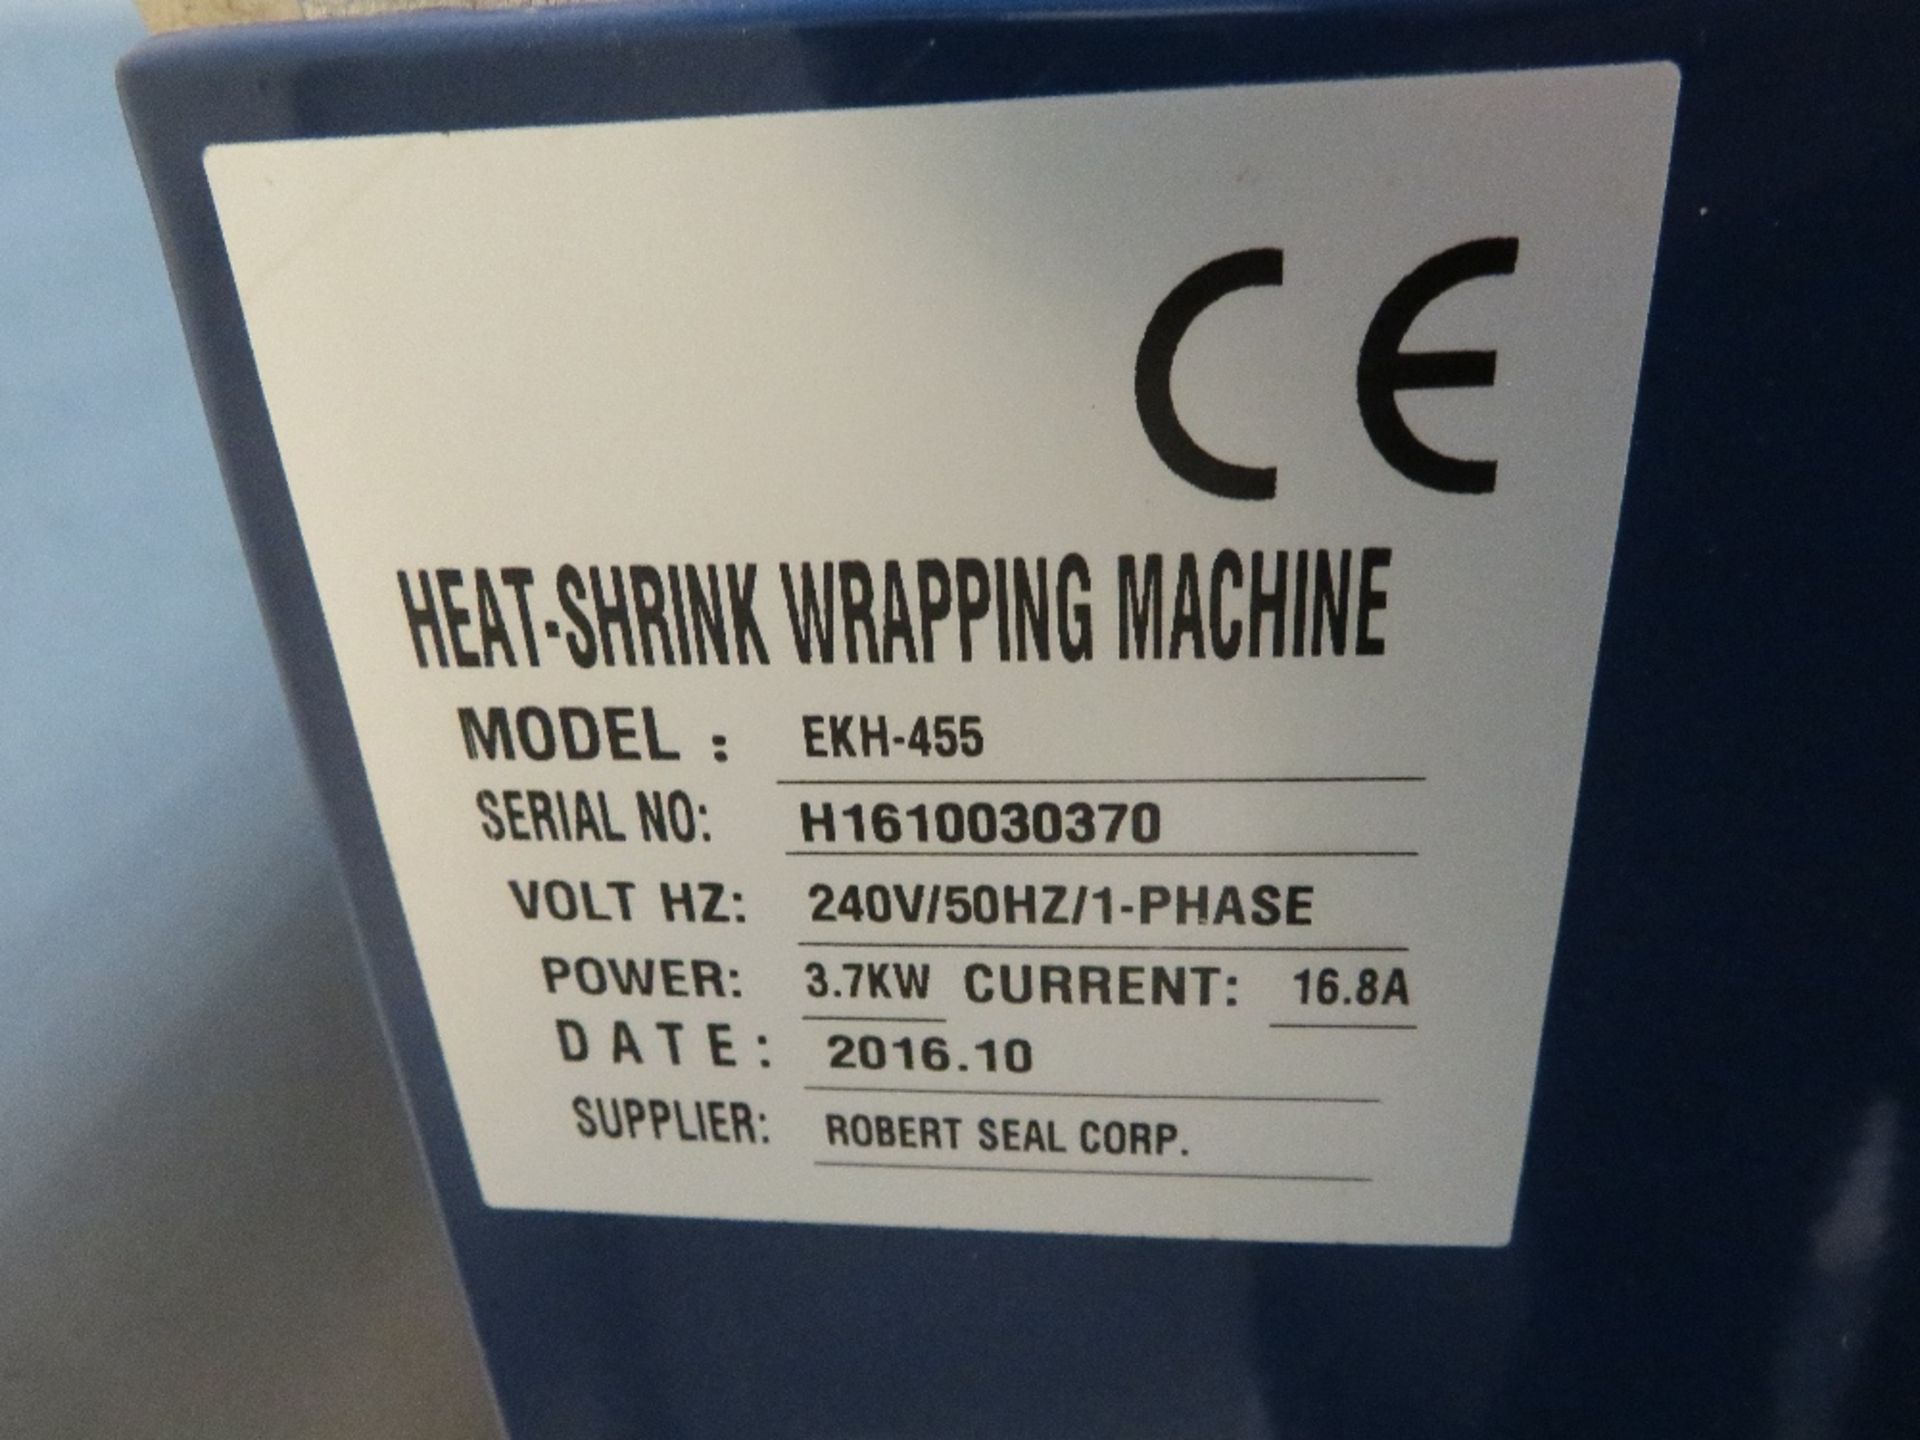 Heat Shrink Wrapping Machine Model EKH-455 A3 , Serial Number H1610030370, Date 10/2016 - Image 4 of 4